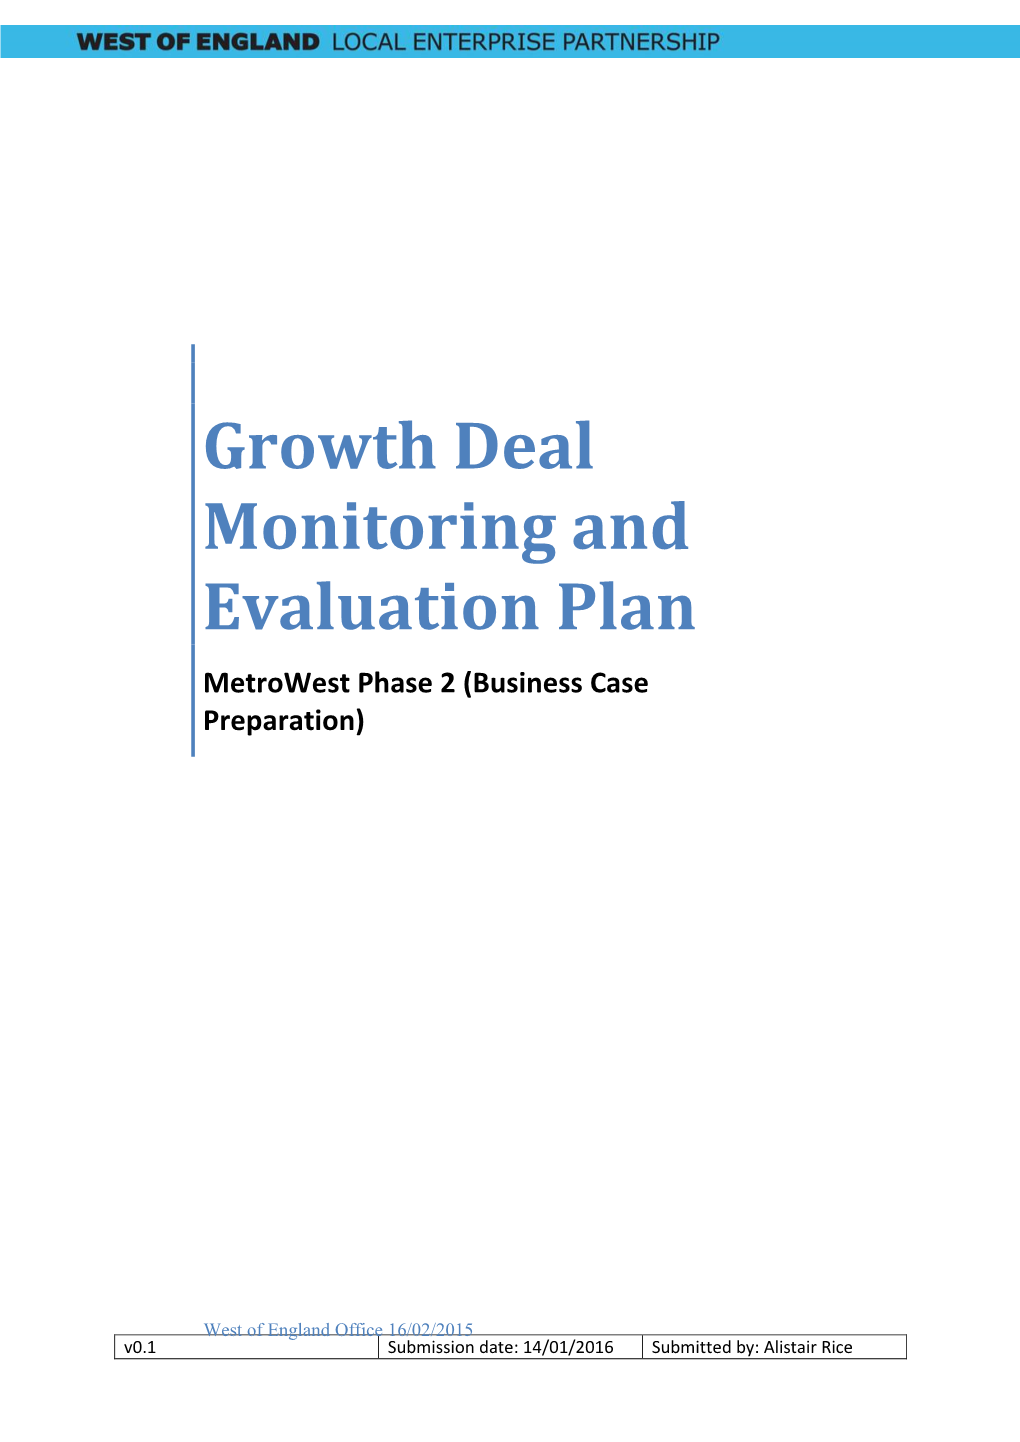 Growth Deal Monitoring and Evaluation Plan Metrowest Phase 2 (Business Case Preparation)